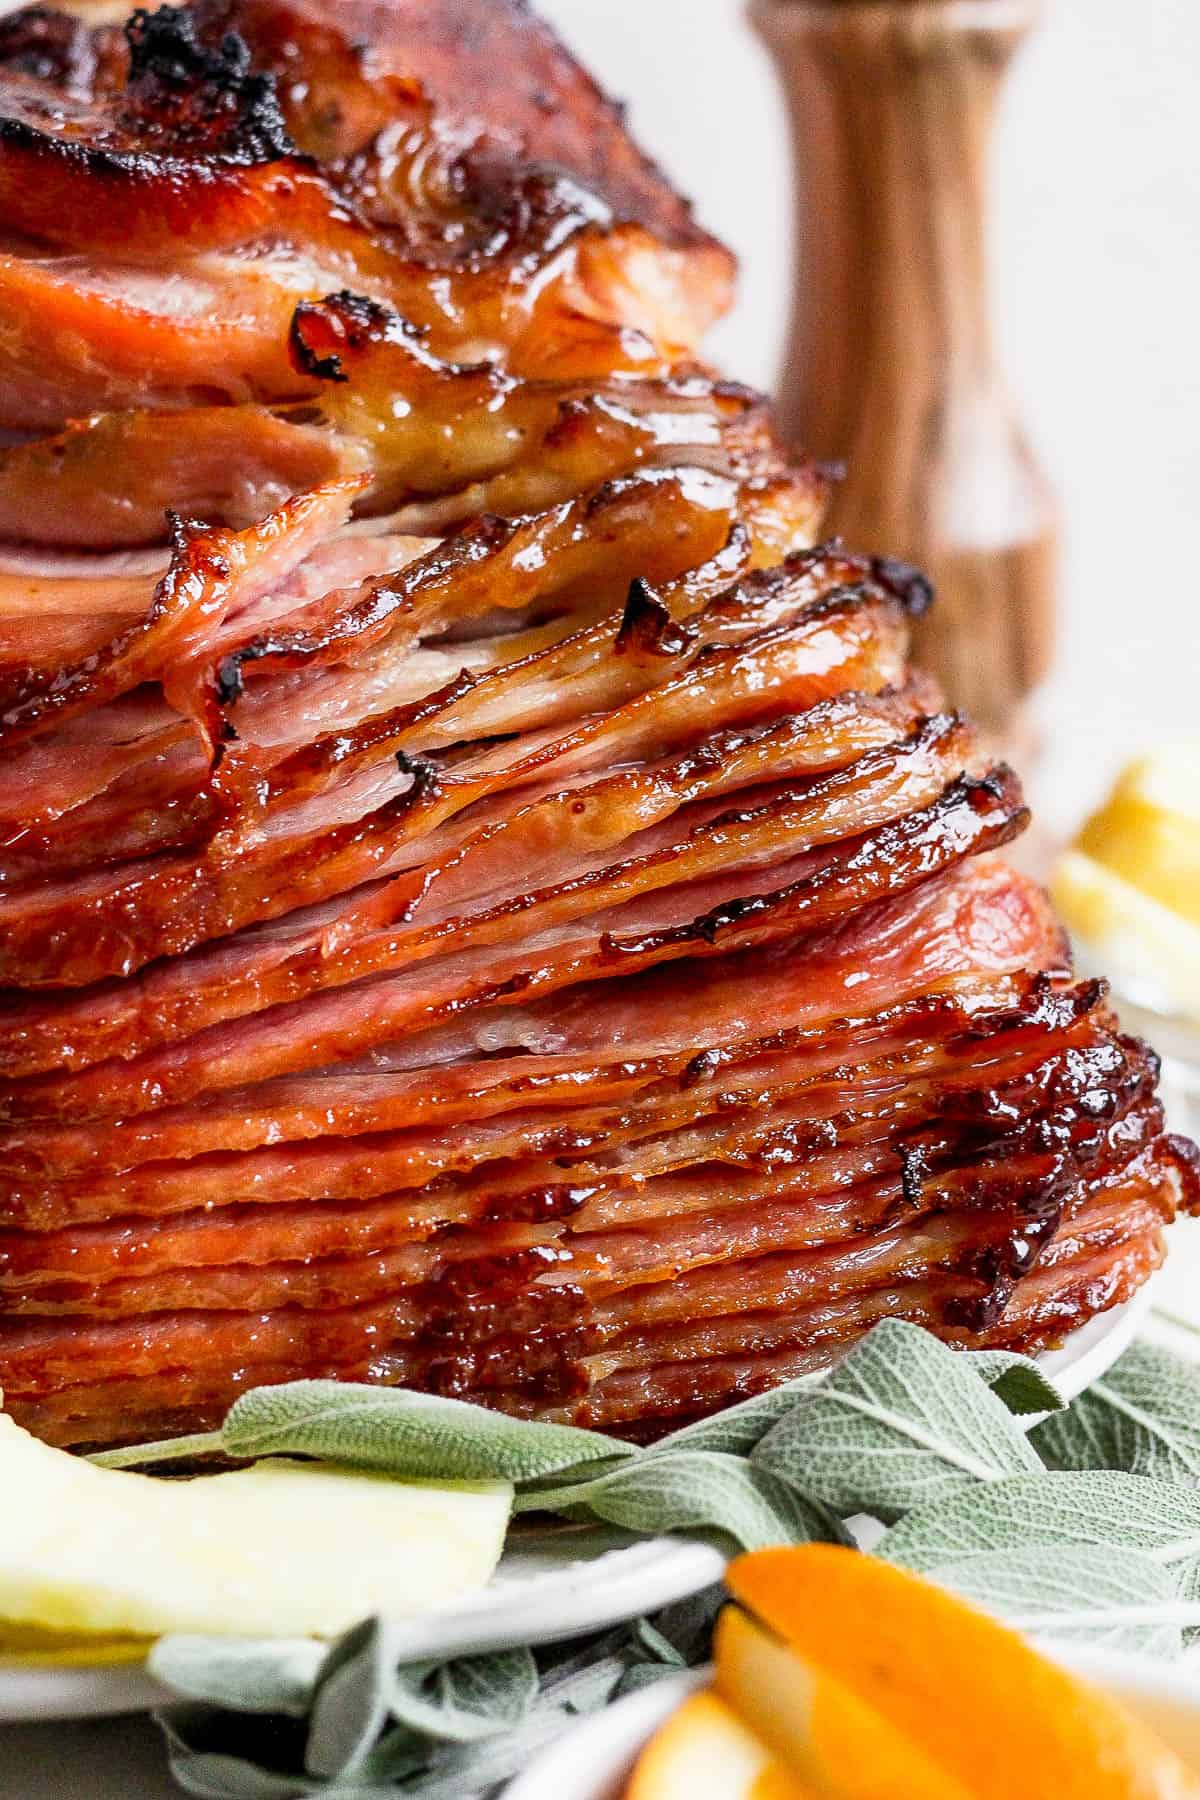 A close up of a cooked spiral ham on a plate.